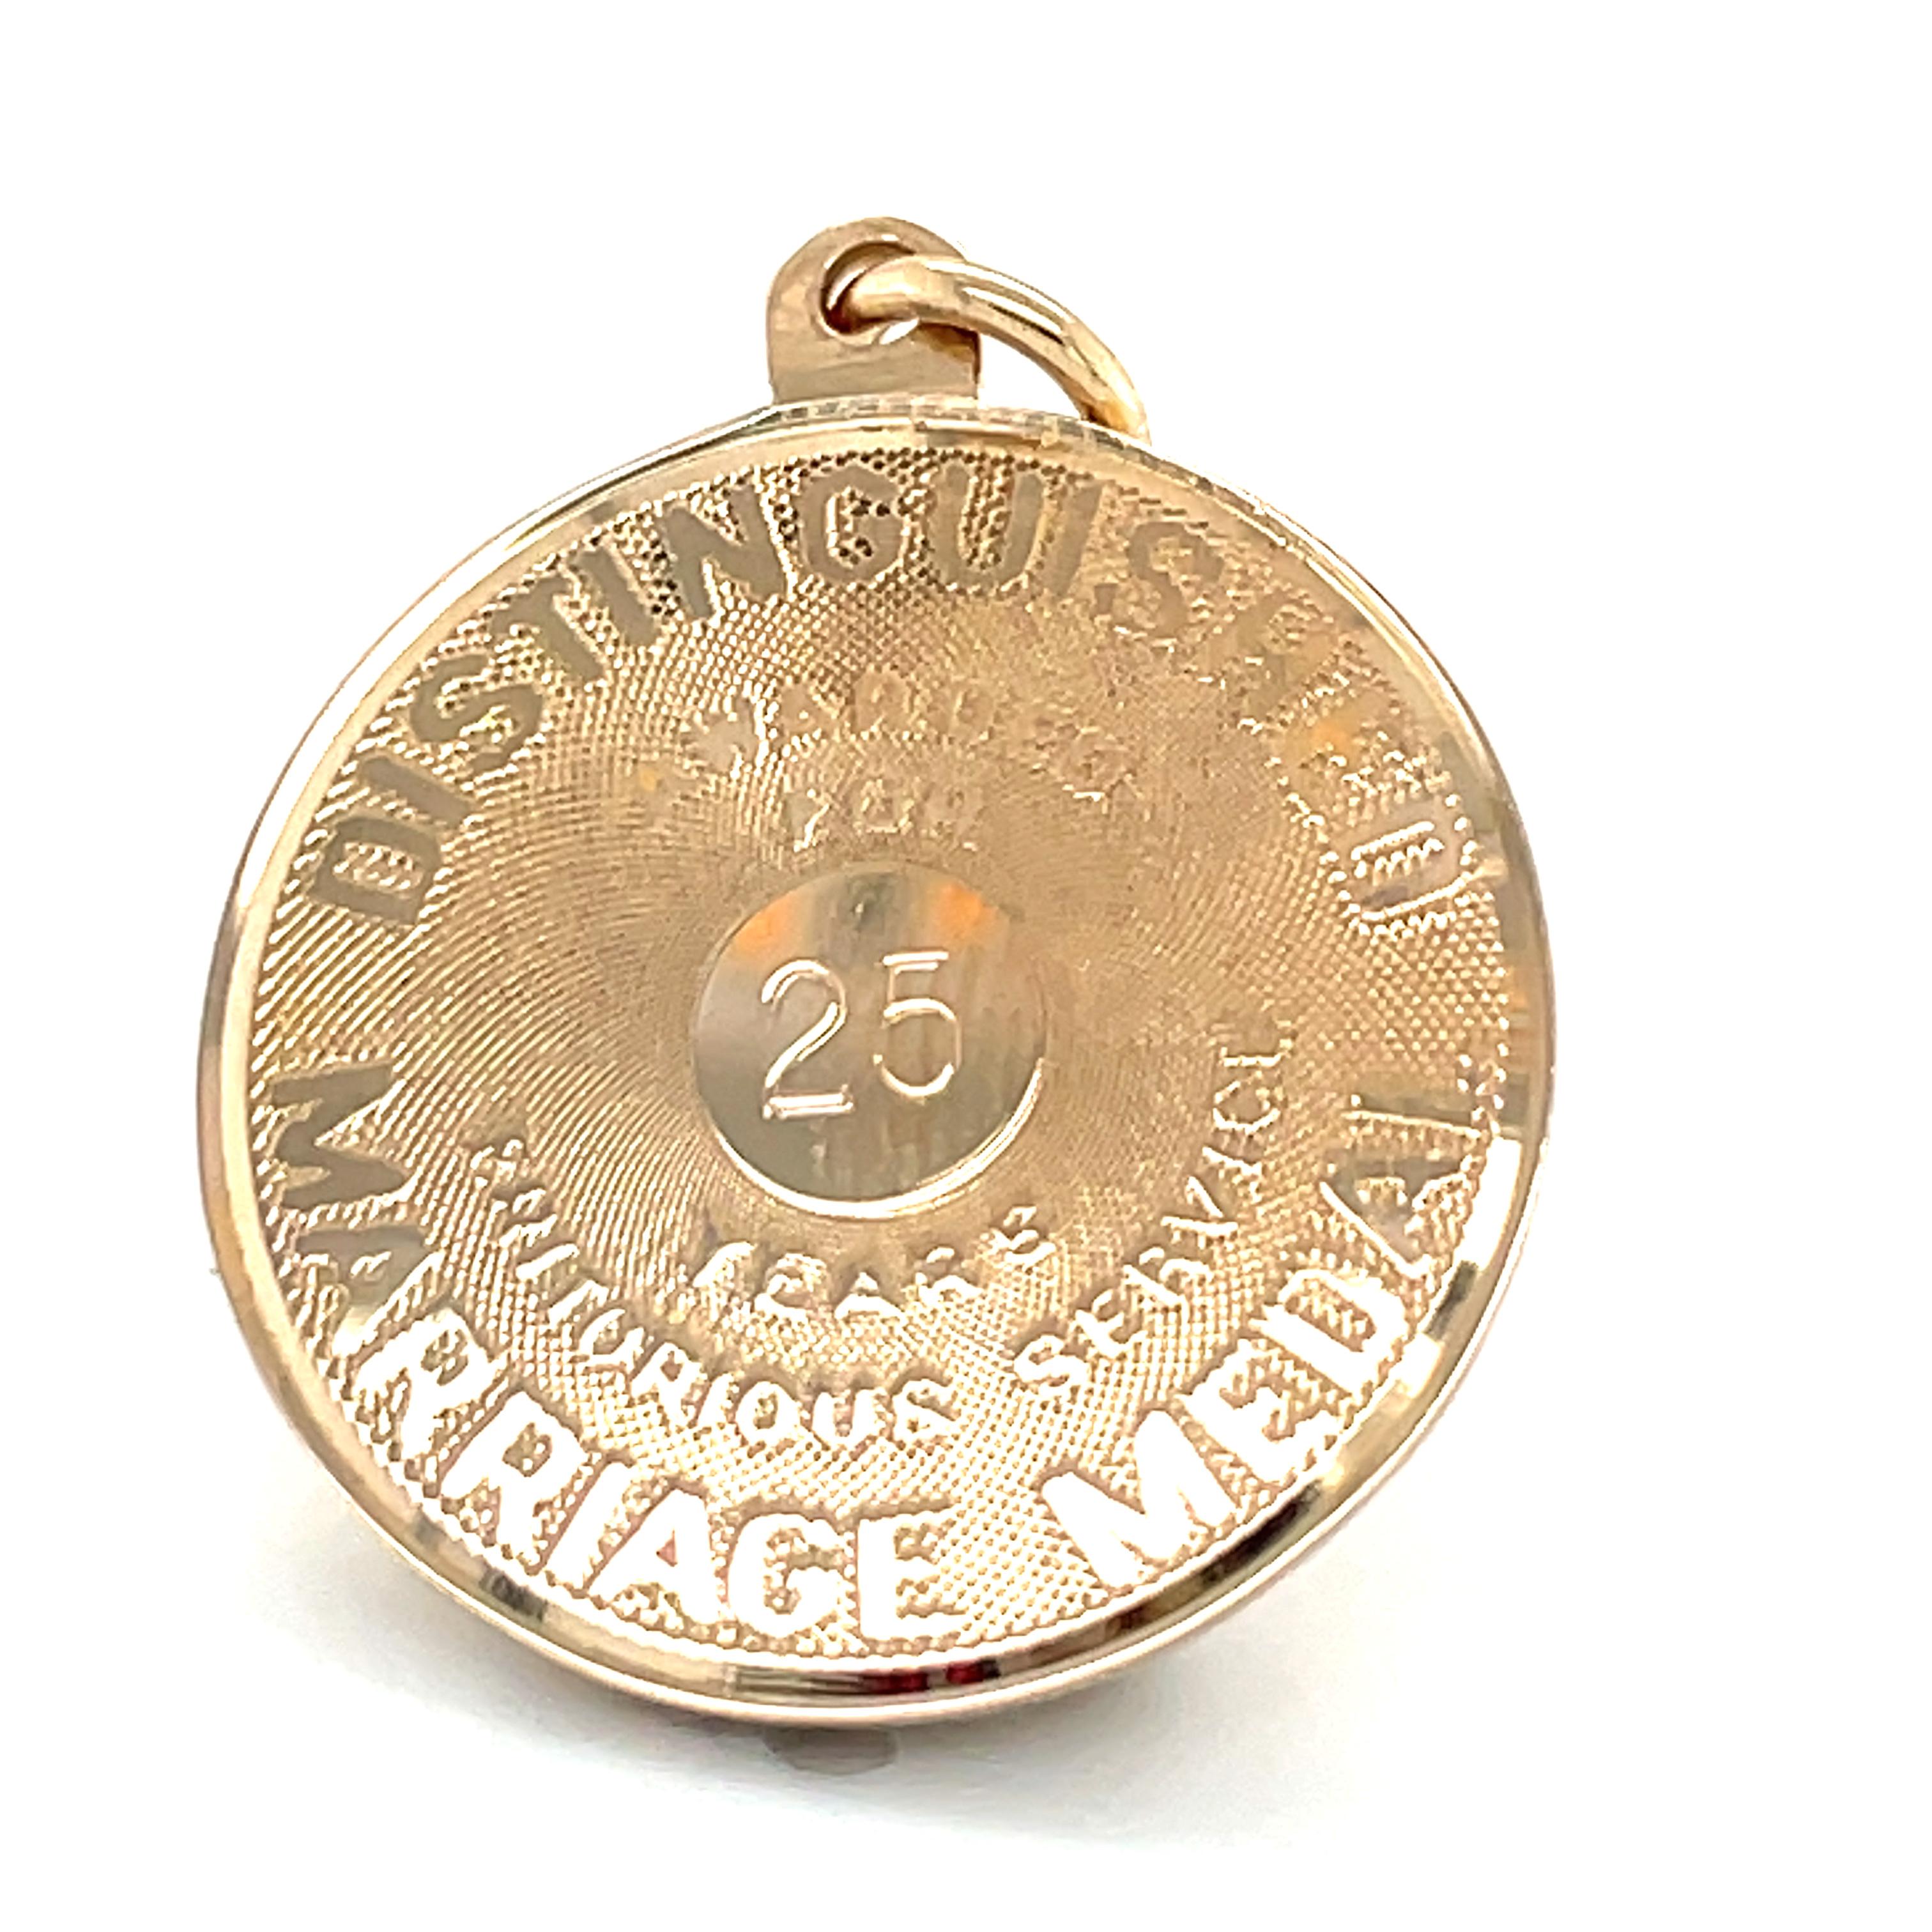 Amusing charm:  a round gold disc with applied letters:  